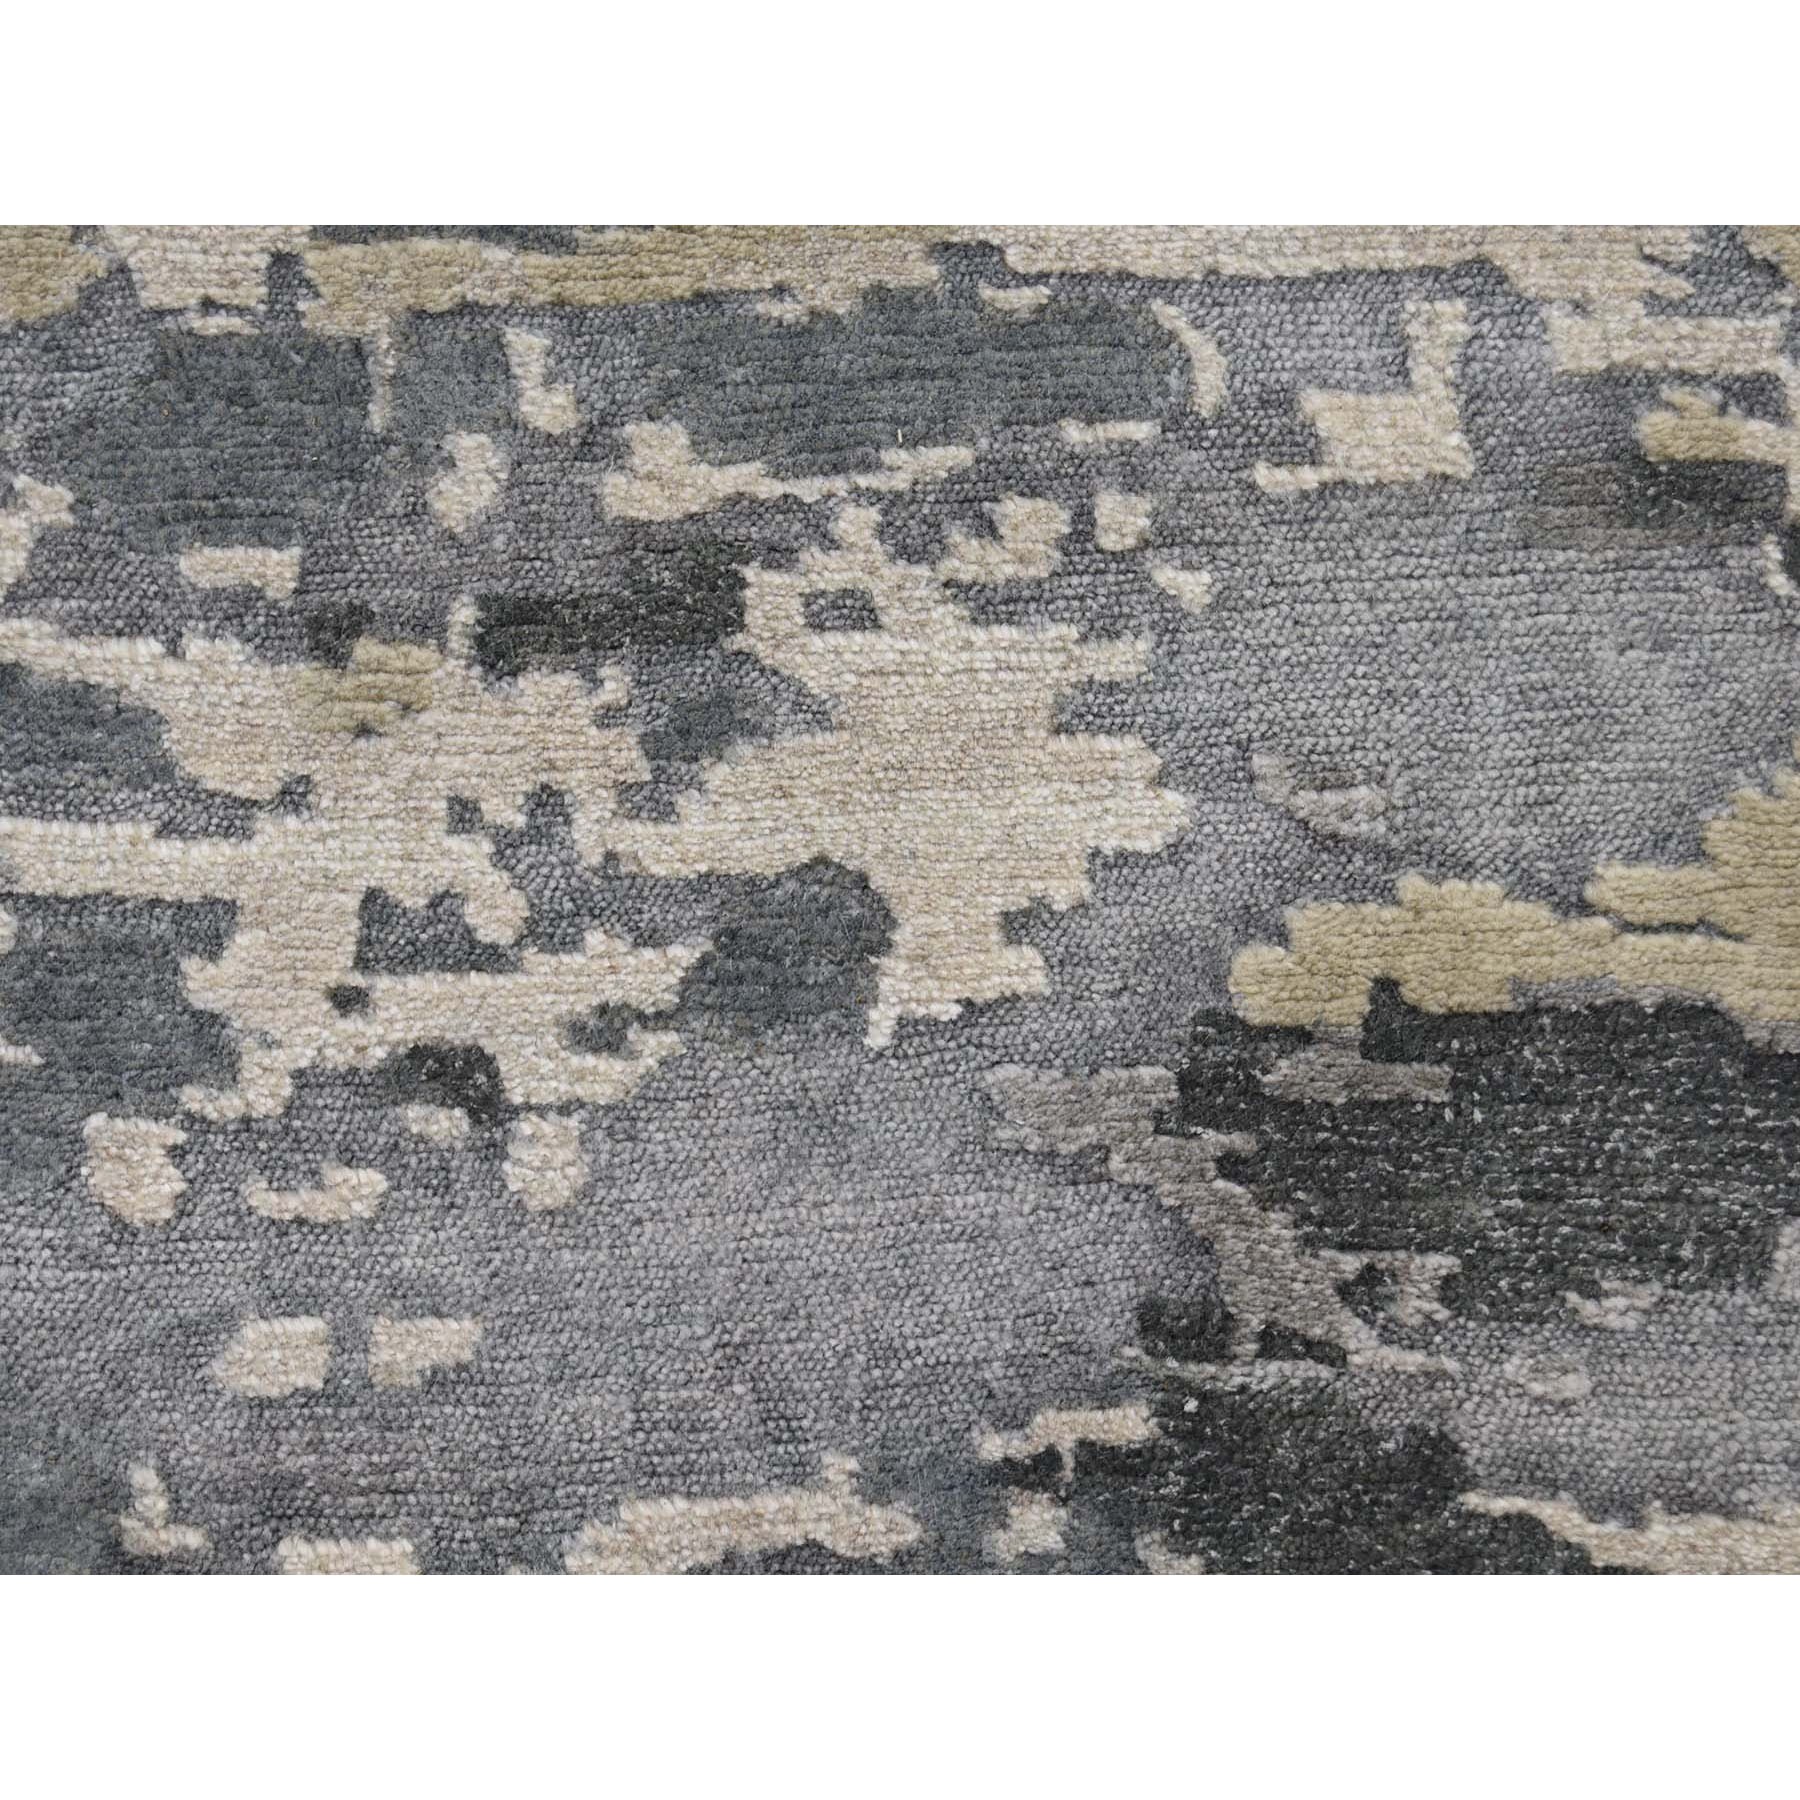 8-1 x10- Hi-Low Pile Abstract Design Wool And Silk Hand-Knotted Oriental Rug 